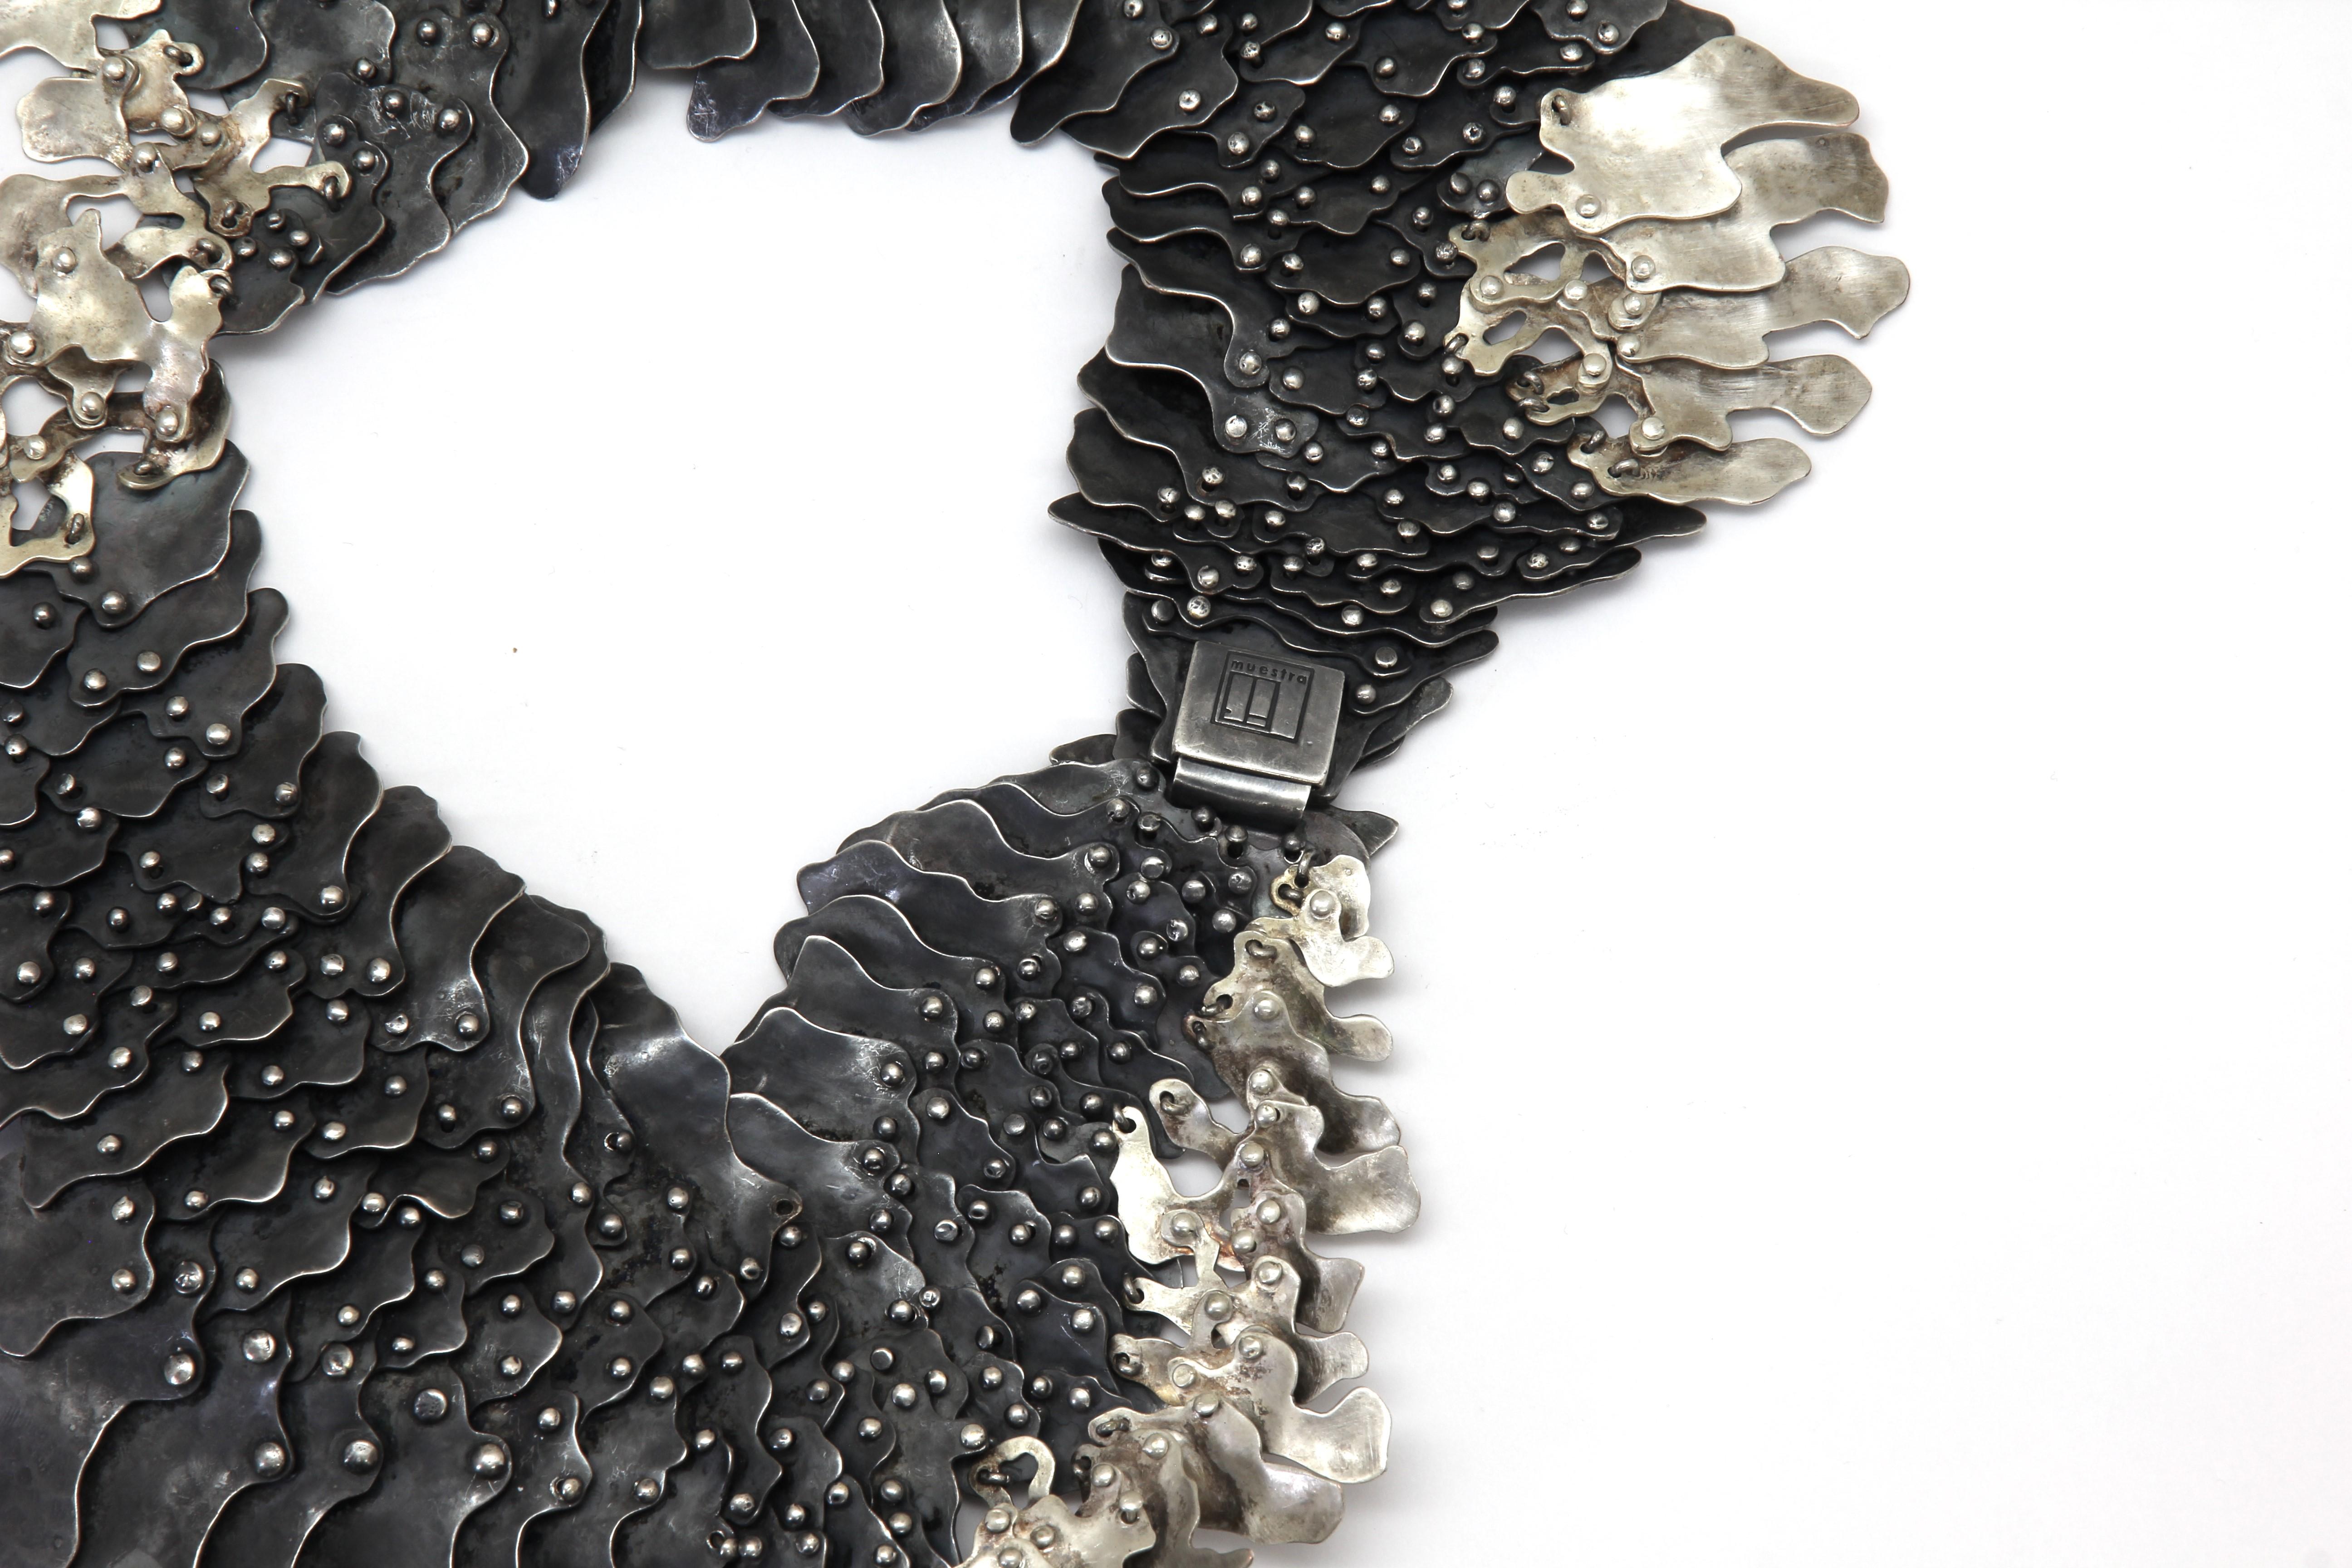 Contemporary Handmade Statement Necklace in Silver .950 by Eduardo Herrera For Sale